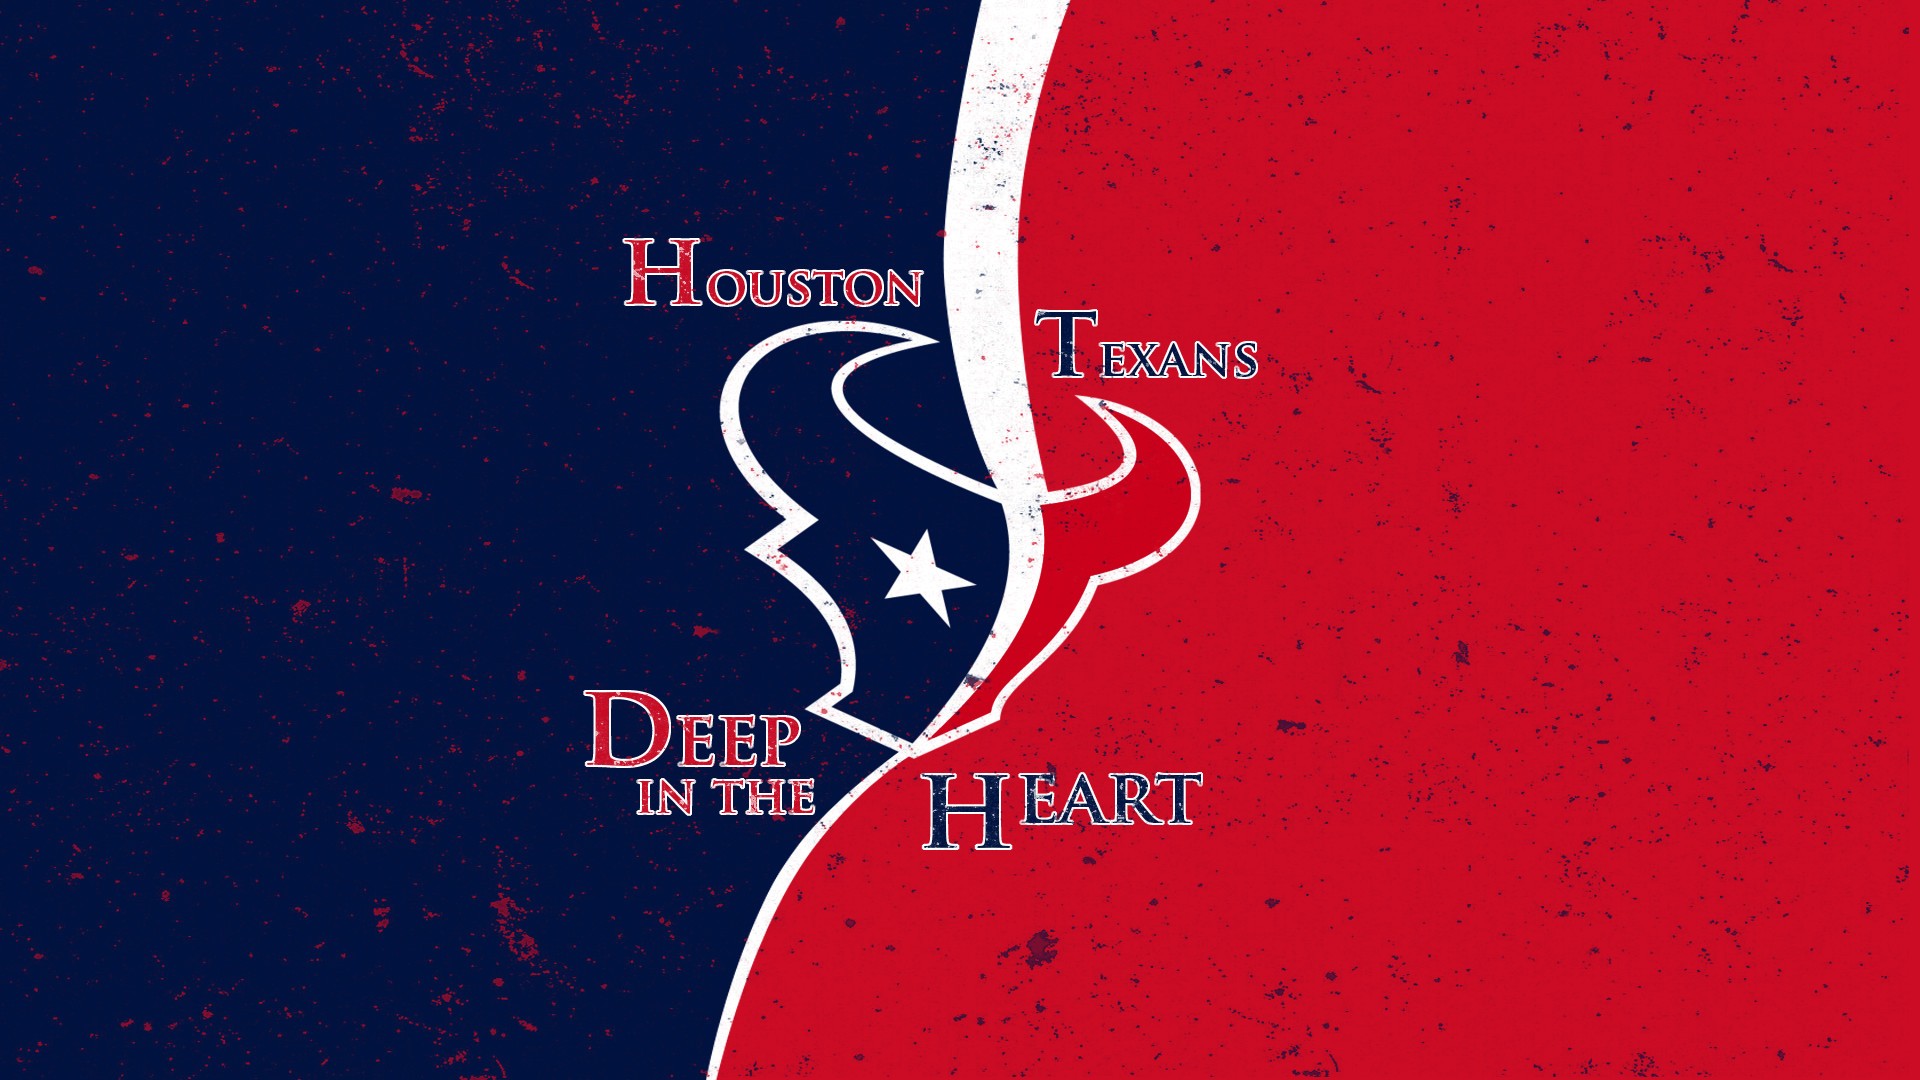 Wallpapers Houston Texans NFL with resolution 1920x1080 pixel. You can make this wallpaper for your Mac or Windows Desktop Background, iPhone, Android or Tablet and another Smartphone device